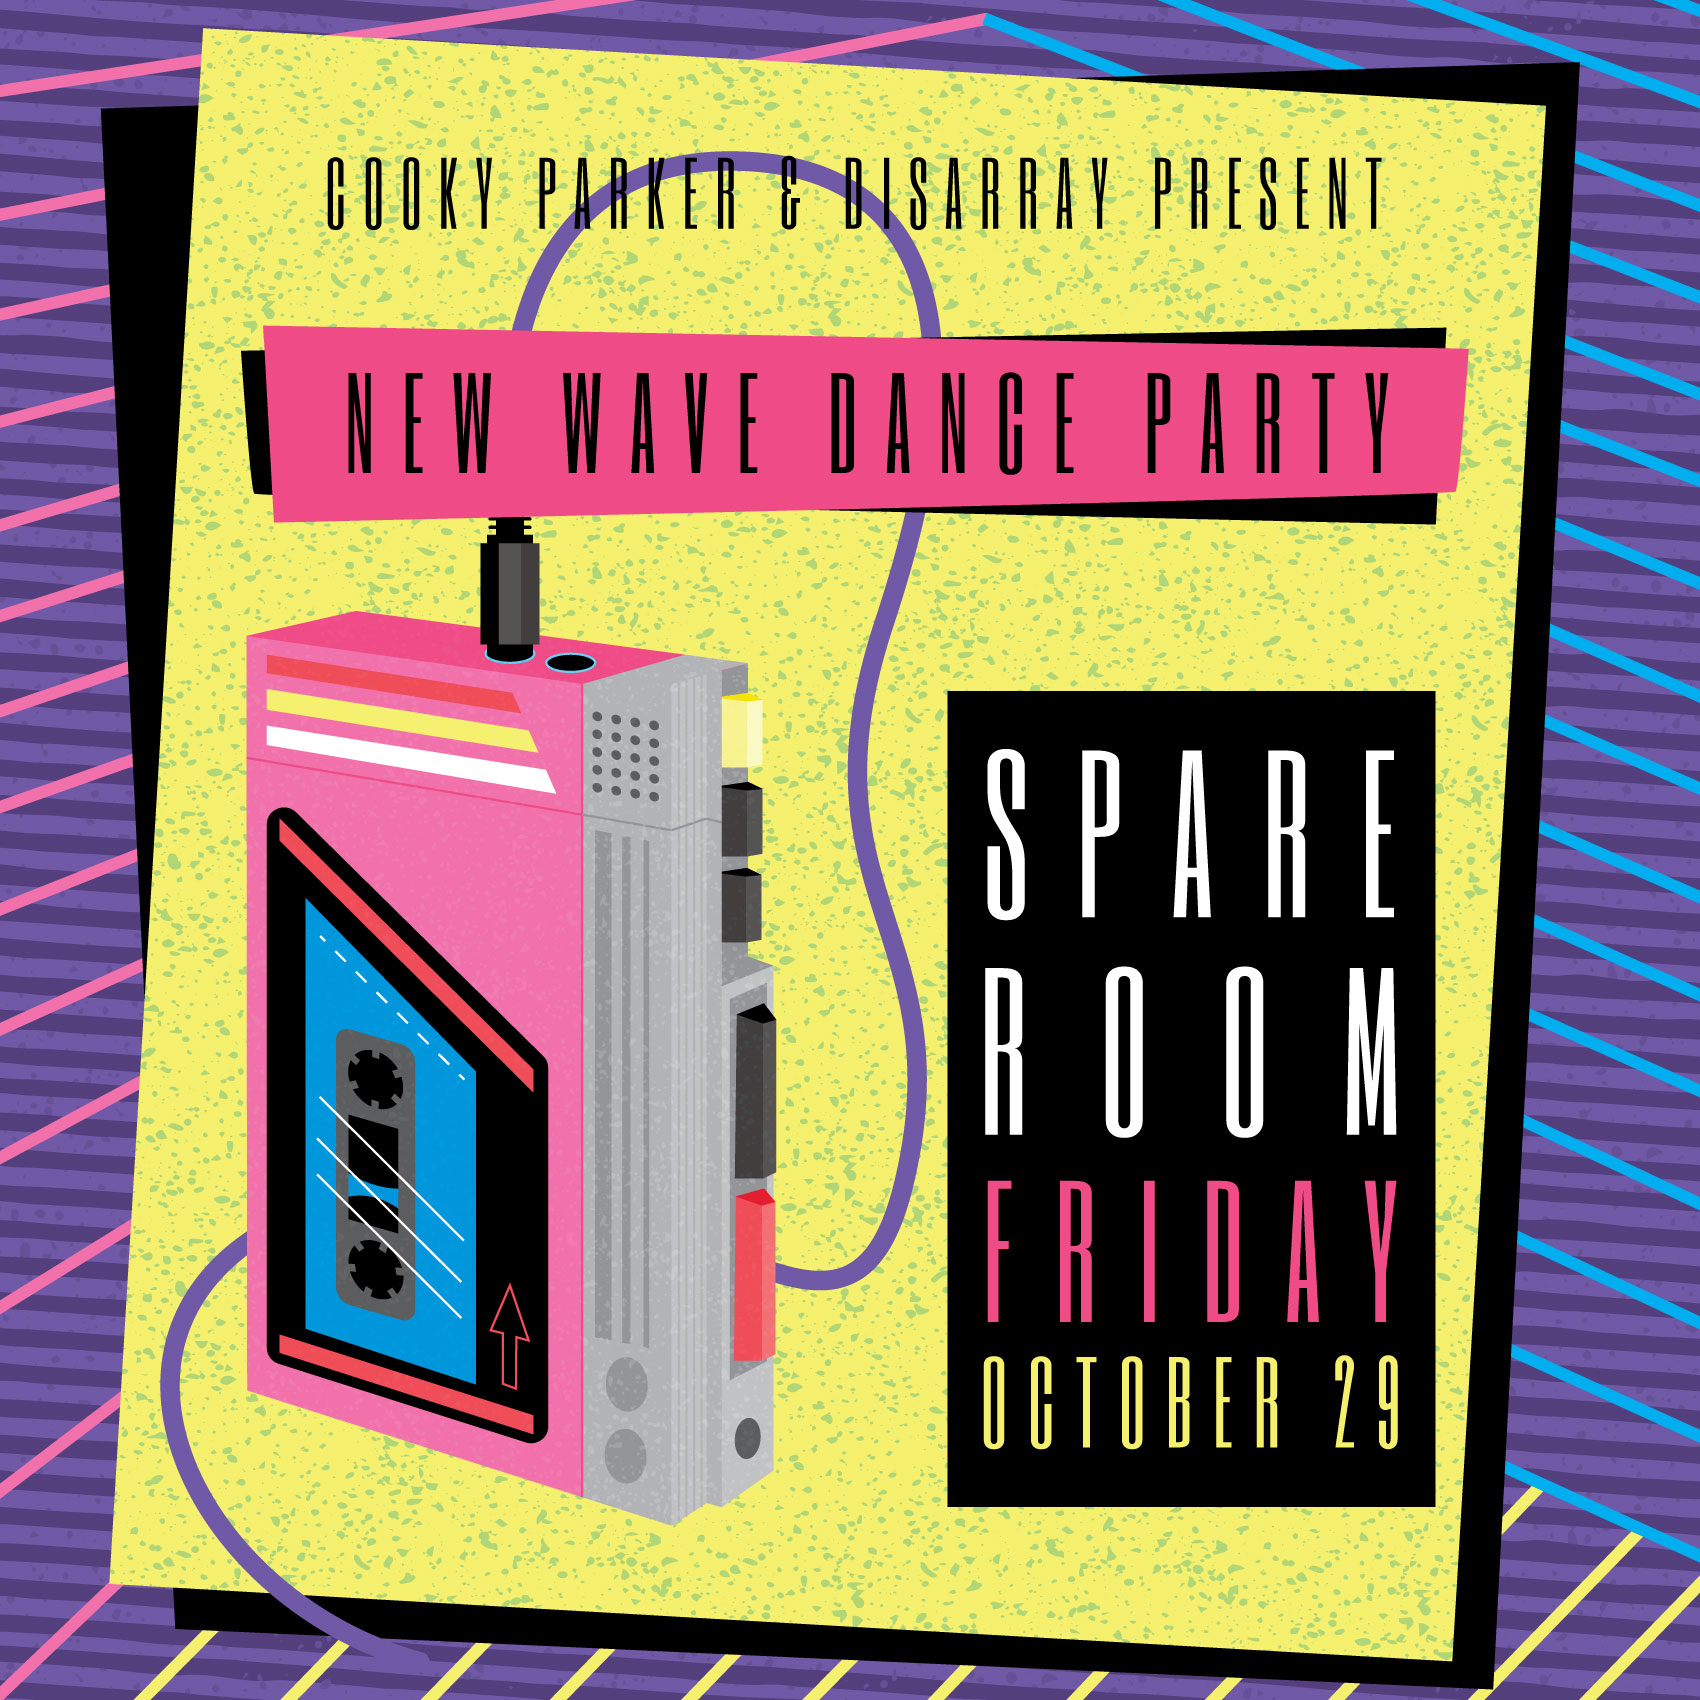 October 29, 2022 at Spare Room